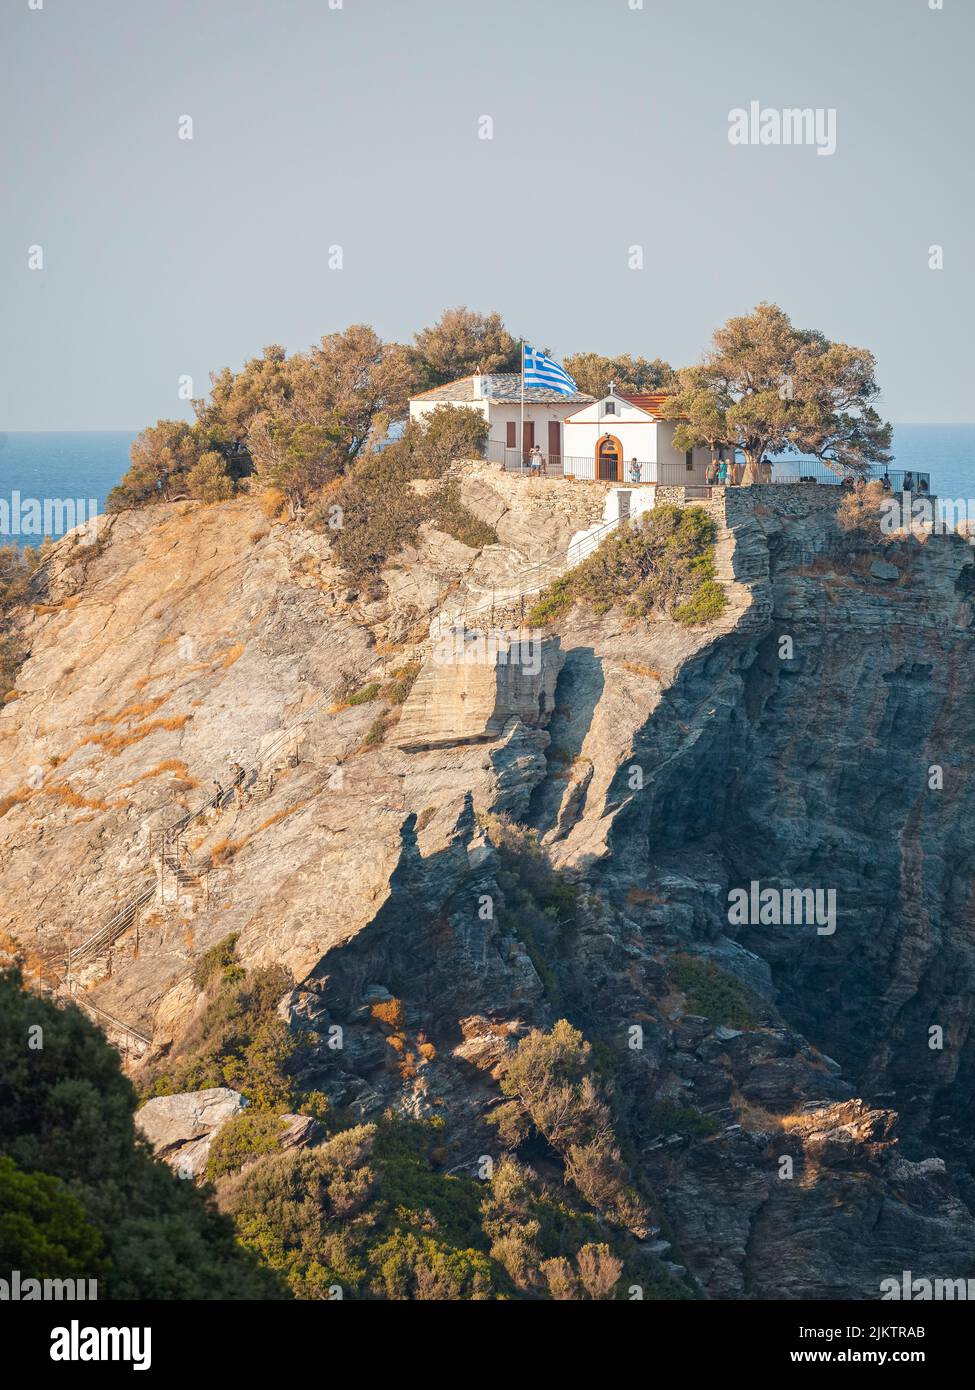 A view of the picturesque chapel of Saint John on a cliff Stock Photo